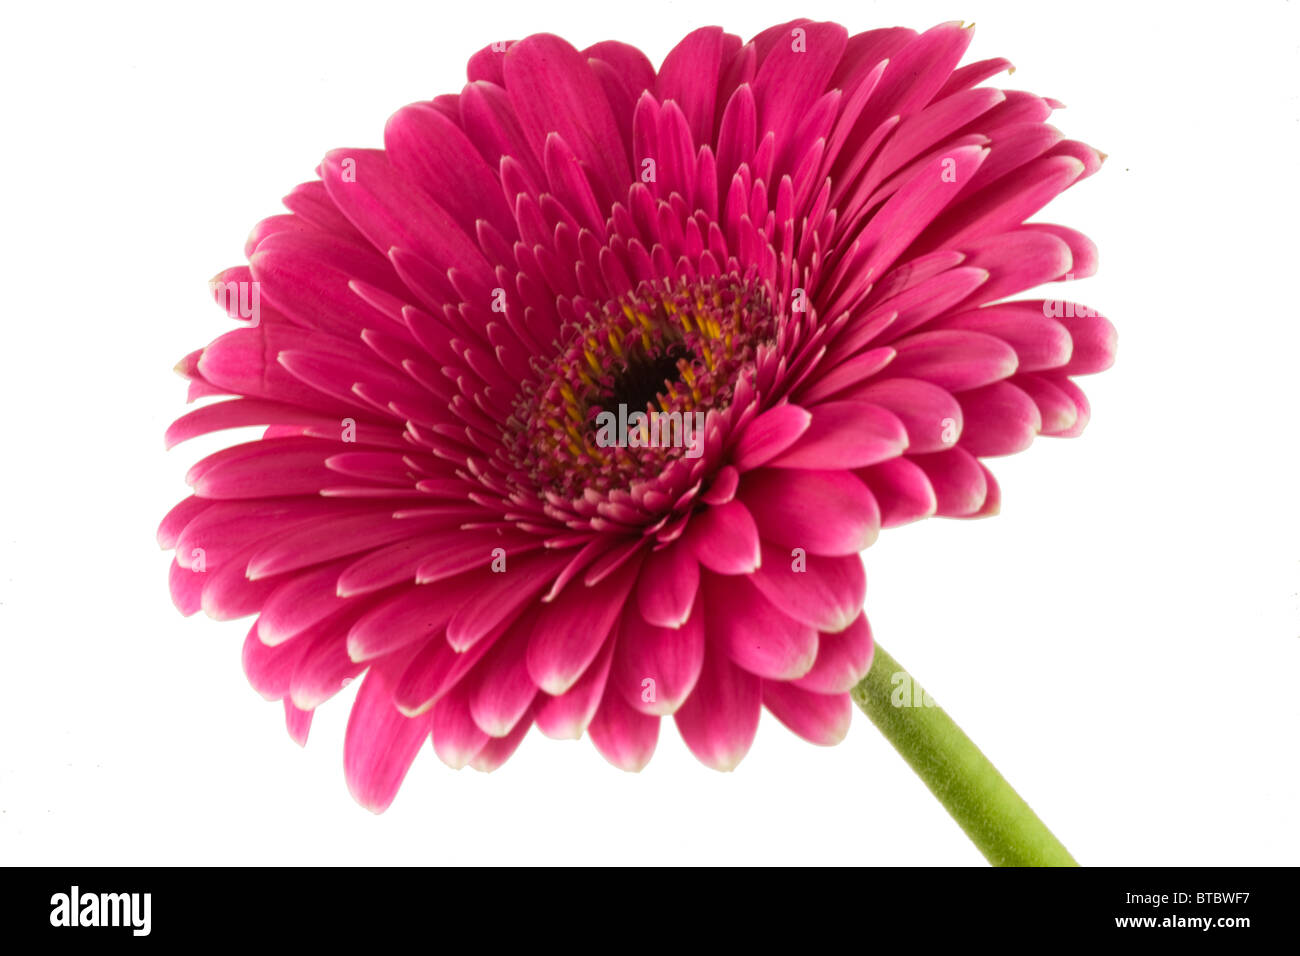 Pink Gerbera Flower Daisy Cut out on White Background Close up Stock Photo